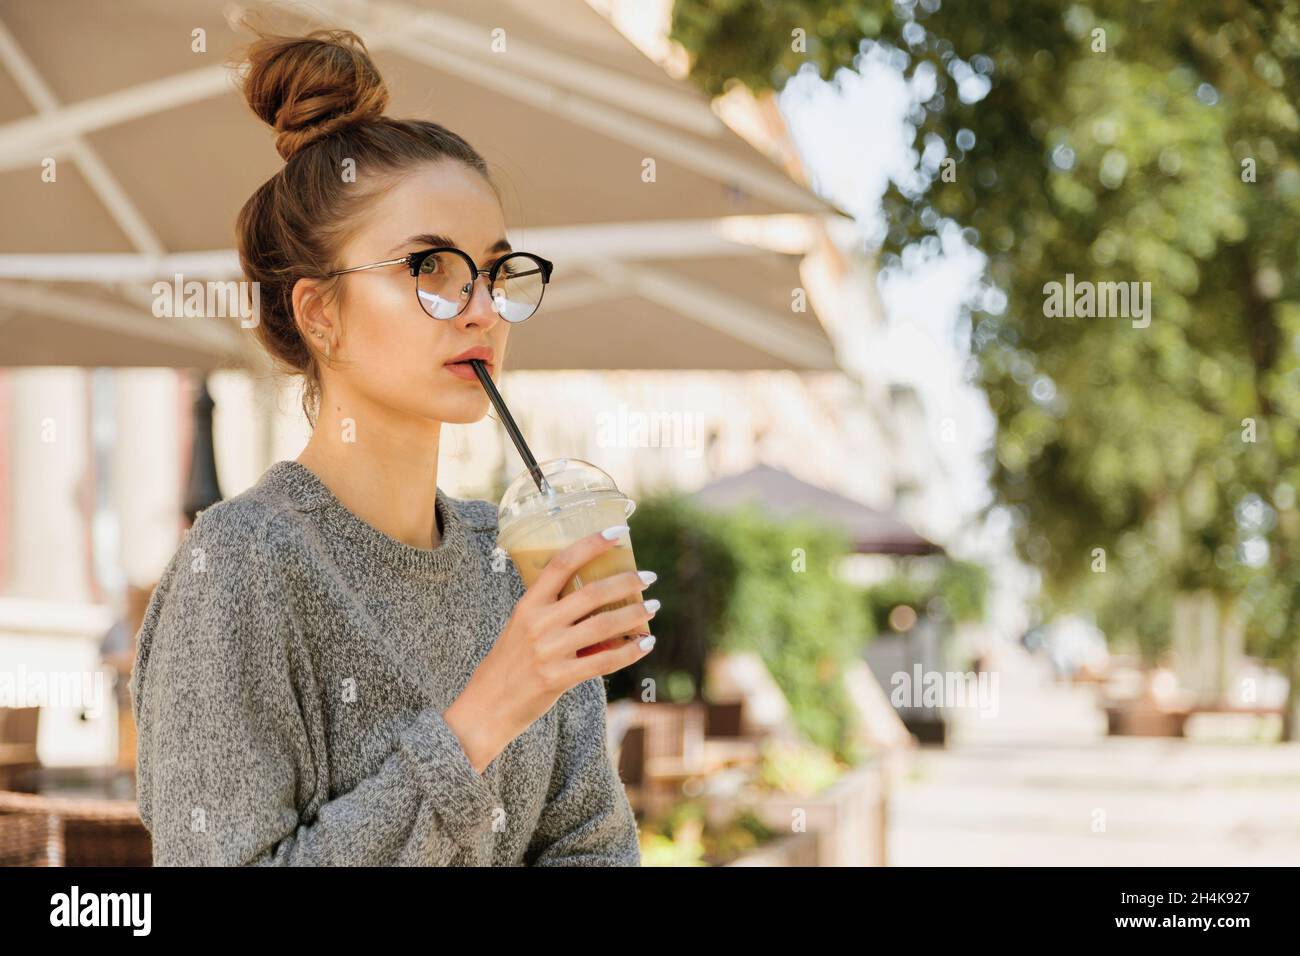 Alone young woman in eyeglasses drinking milkshake and looking away in cozy cafe outdoor. Stock Photo